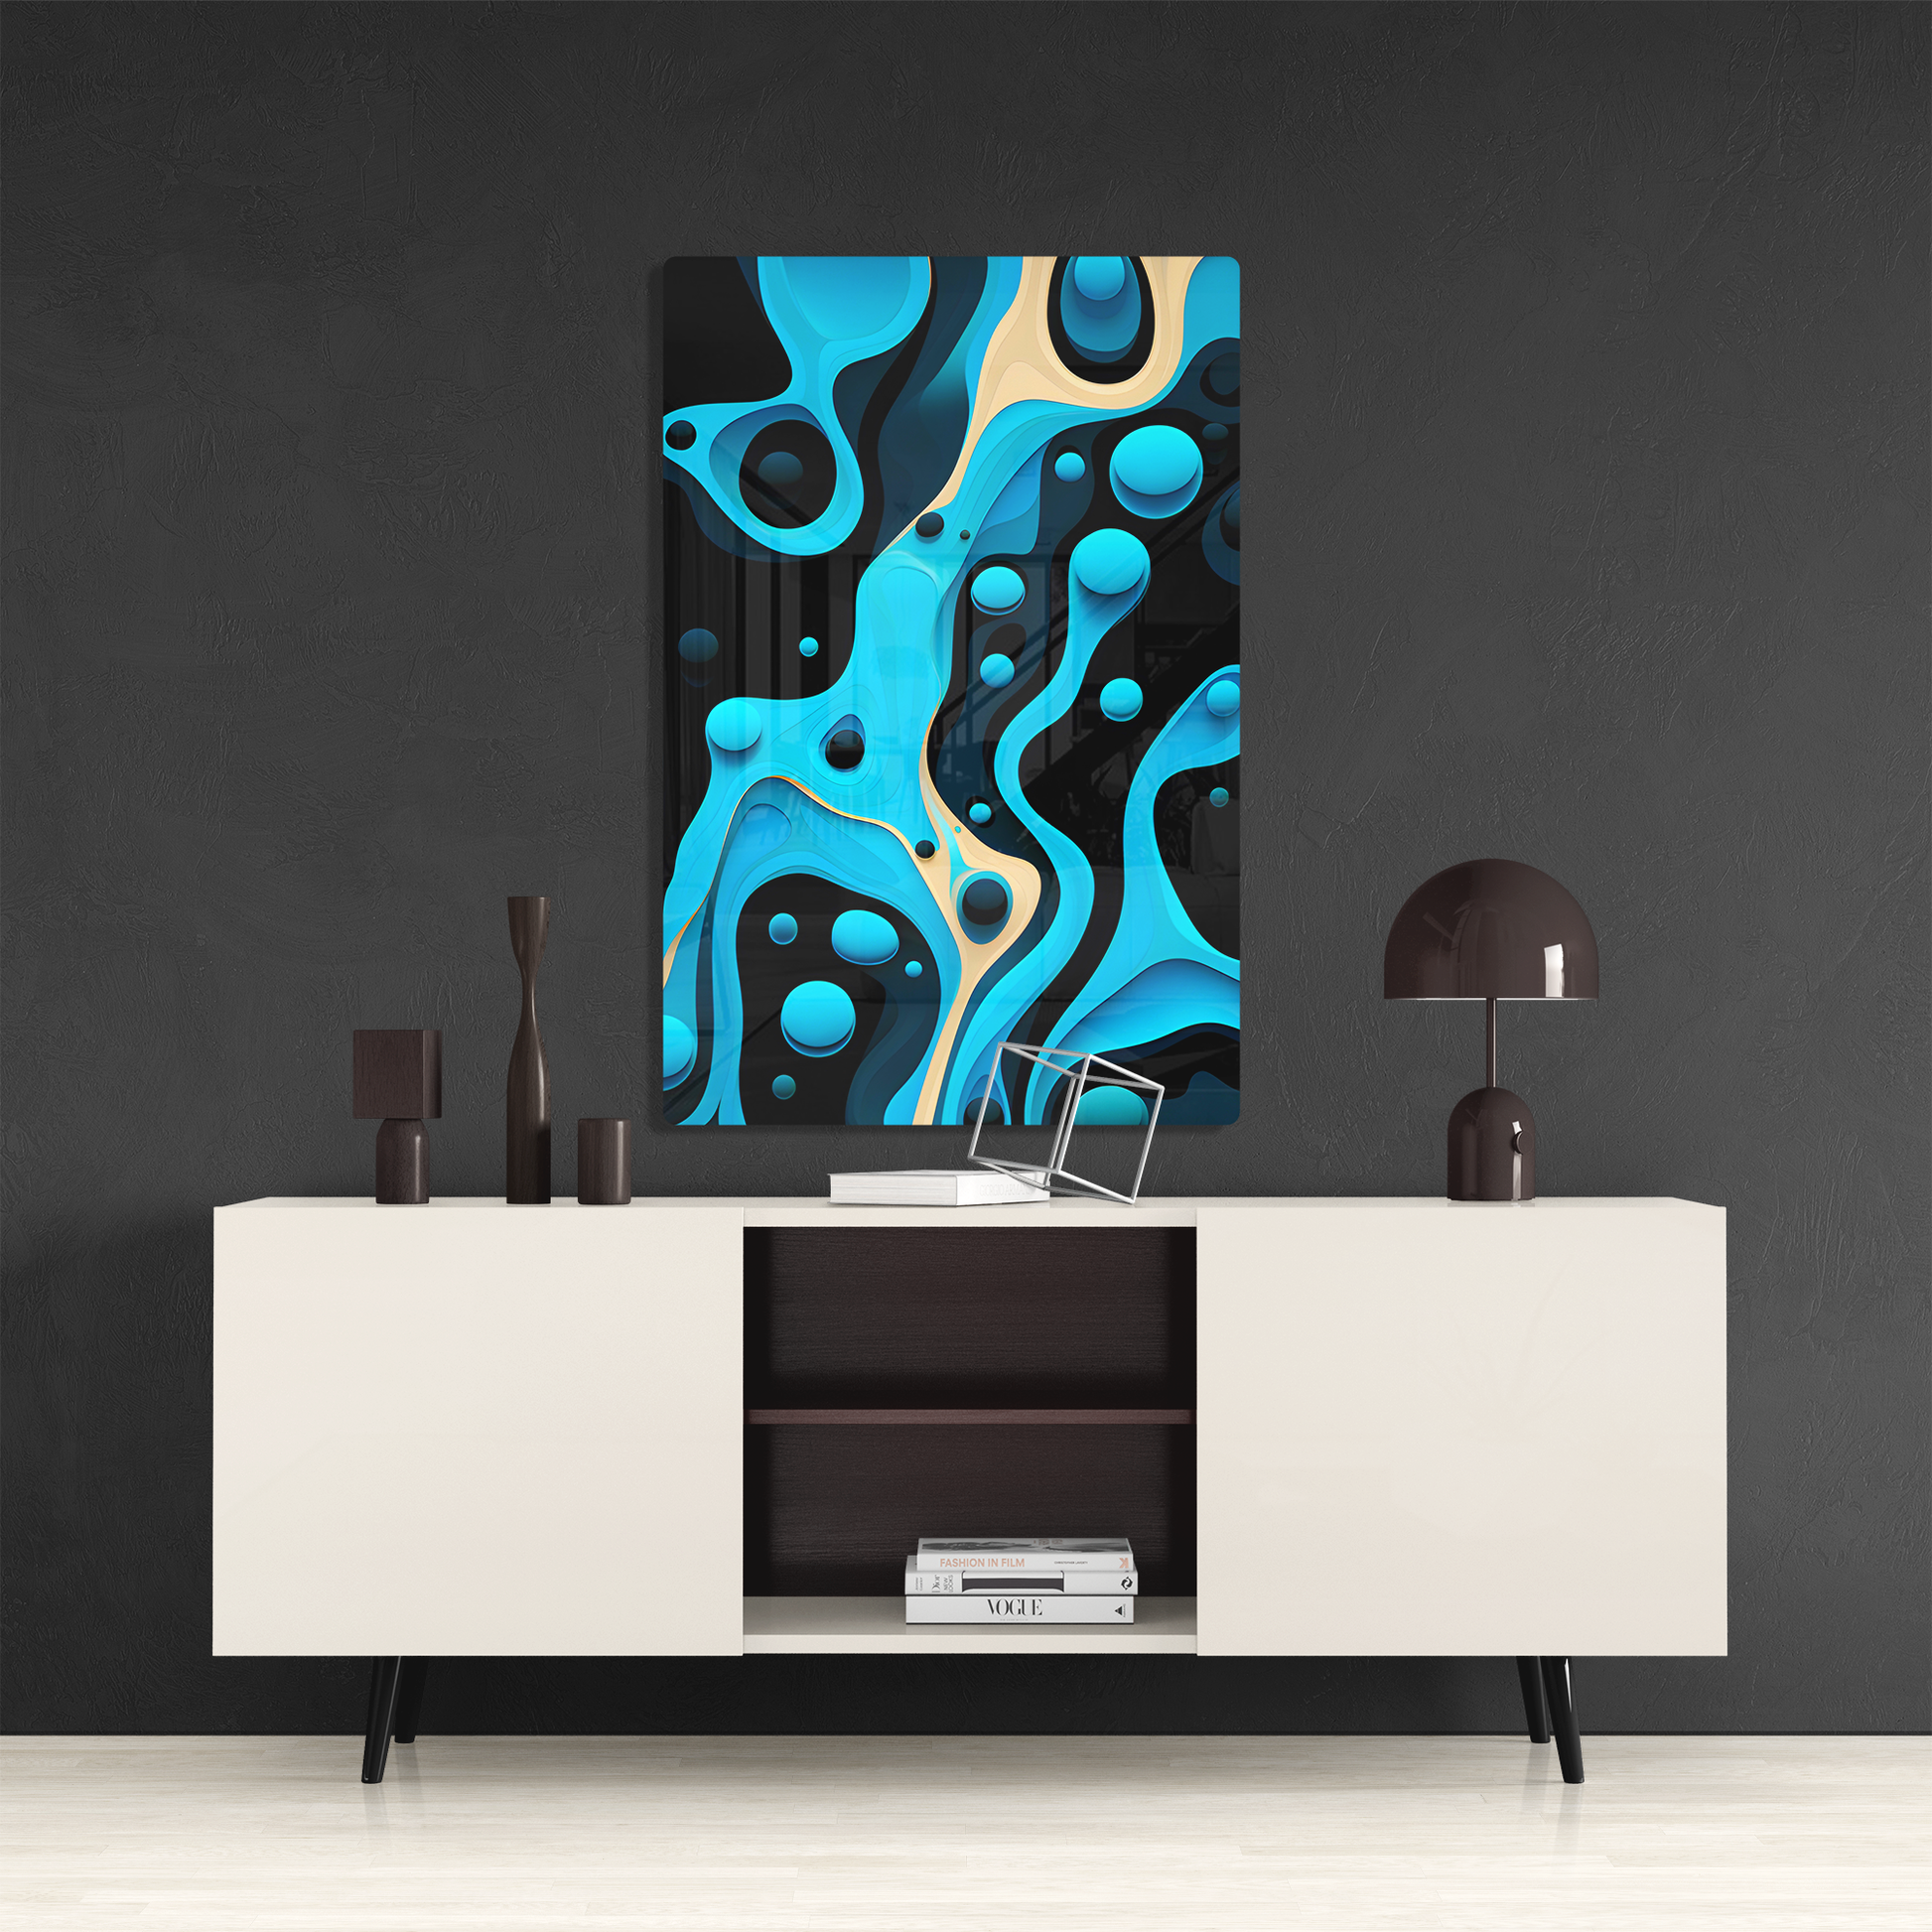 Flowing Shapes Harmony (Acrylic)Flowing Shapes Harmony Acrylic Wall Art with a Glass-Like Finish that Will Take Your Breath Away.Elevate Any Ambiance with Stellar Eye Acrylic Print🌟:Discover the bRimaGallery